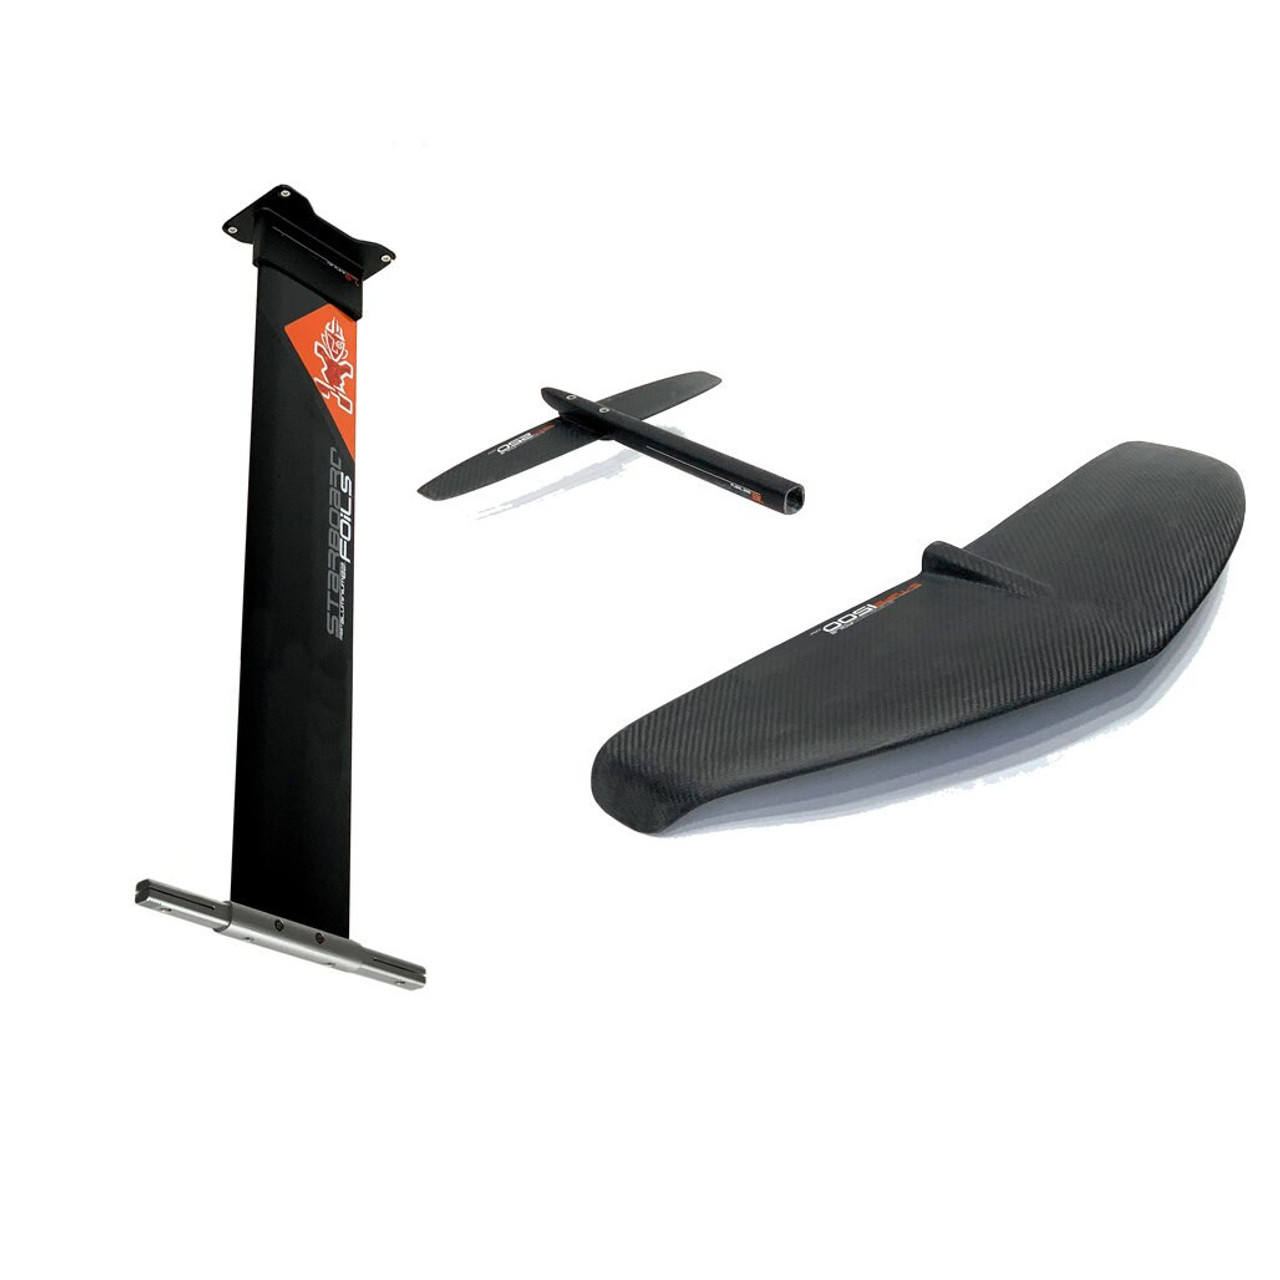 Starboard 2021 S-Type 2400 SUP Wing Foil - 24-7 Boardsports